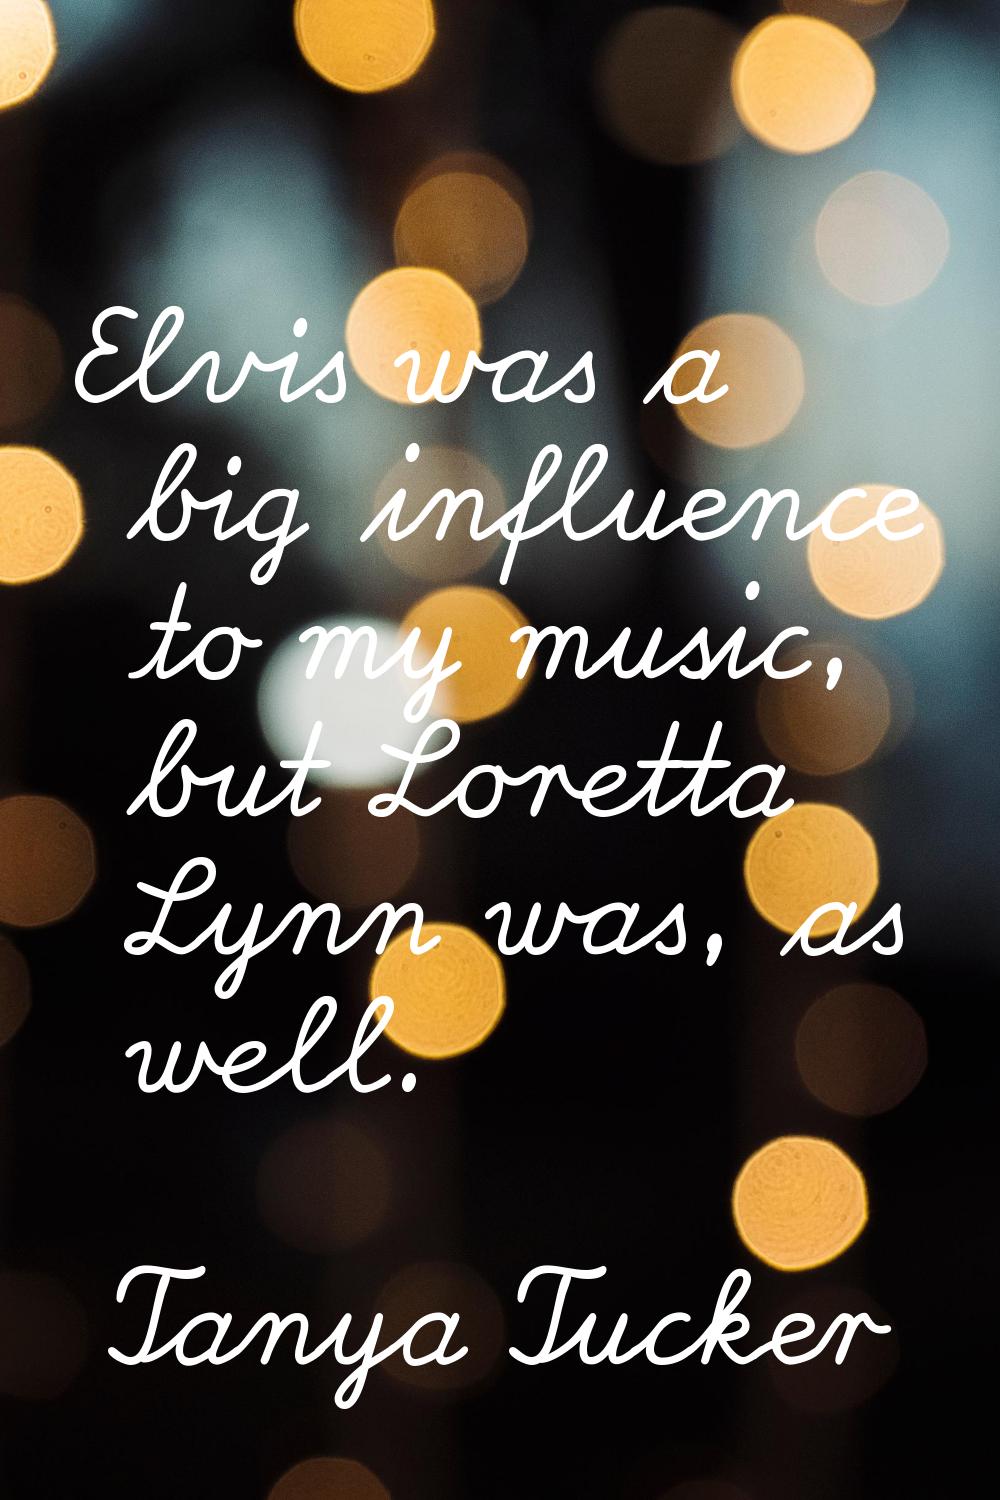 Elvis was a big influence to my music, but Loretta Lynn was, as well.